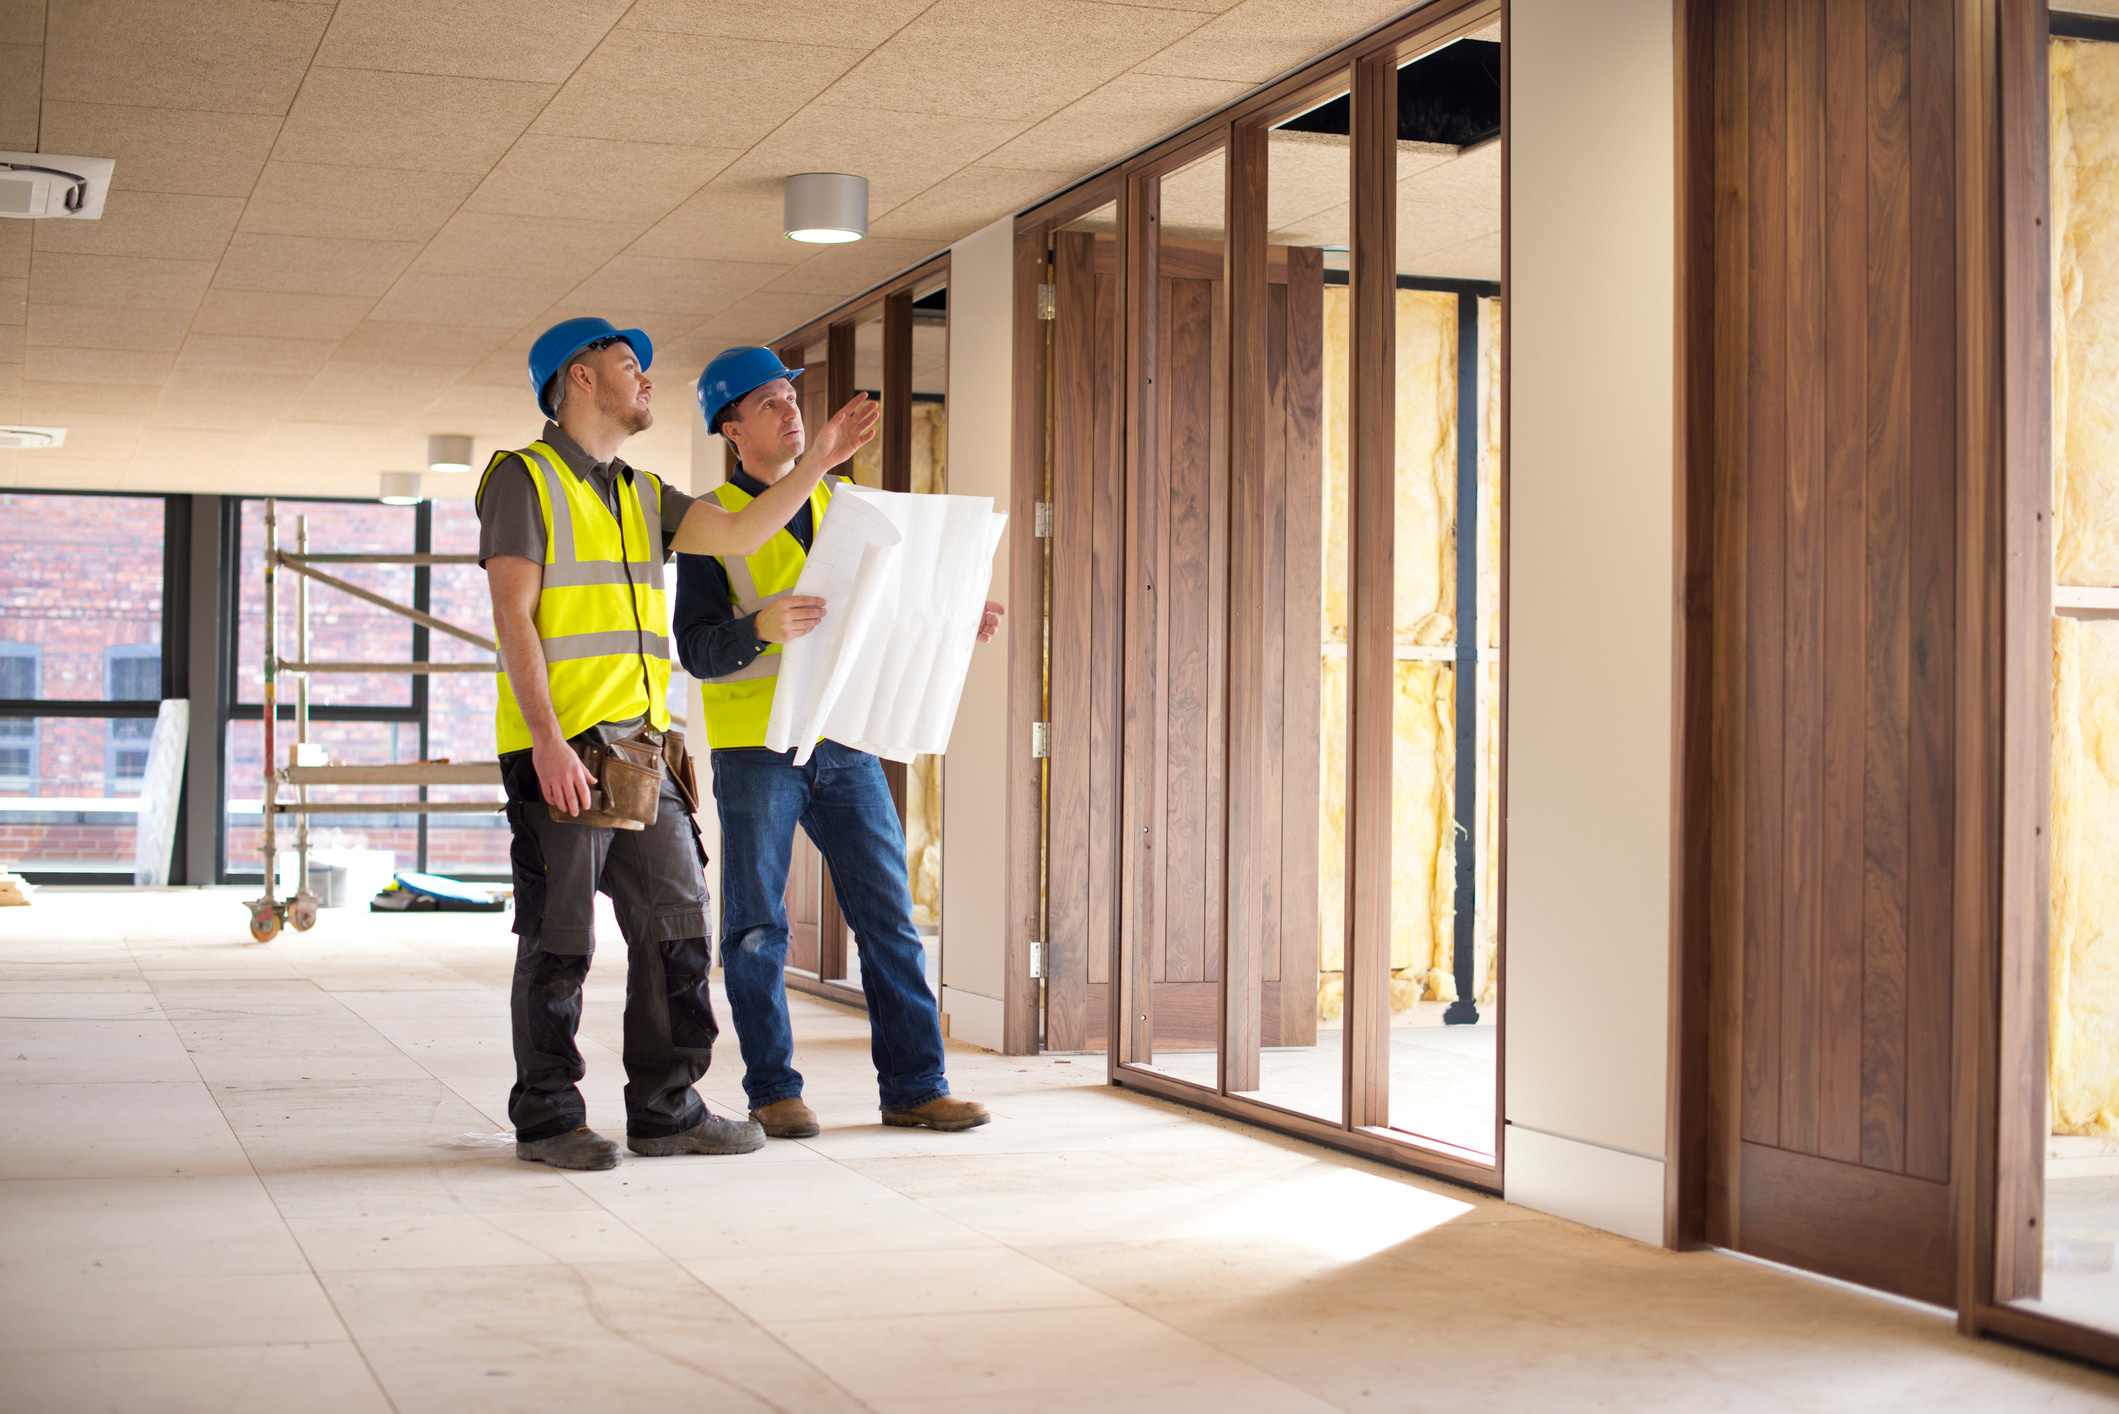 Careers in Construction: How to Become a Construction and Building Inspector